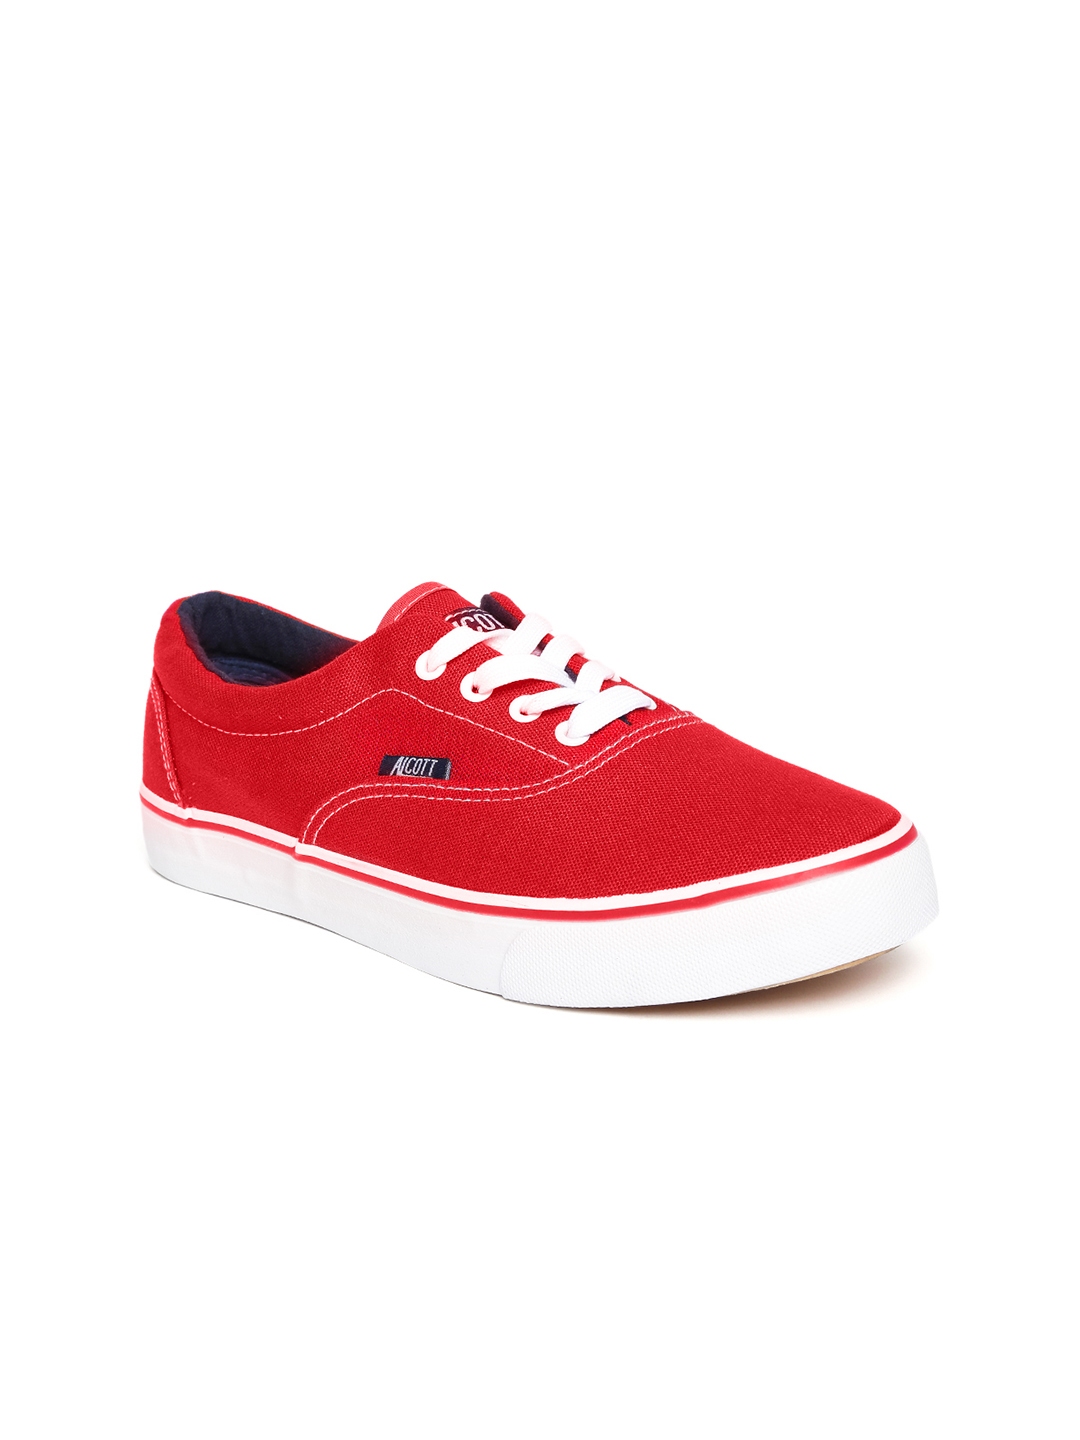 Red Sneakers - Casual Shoes for Women 